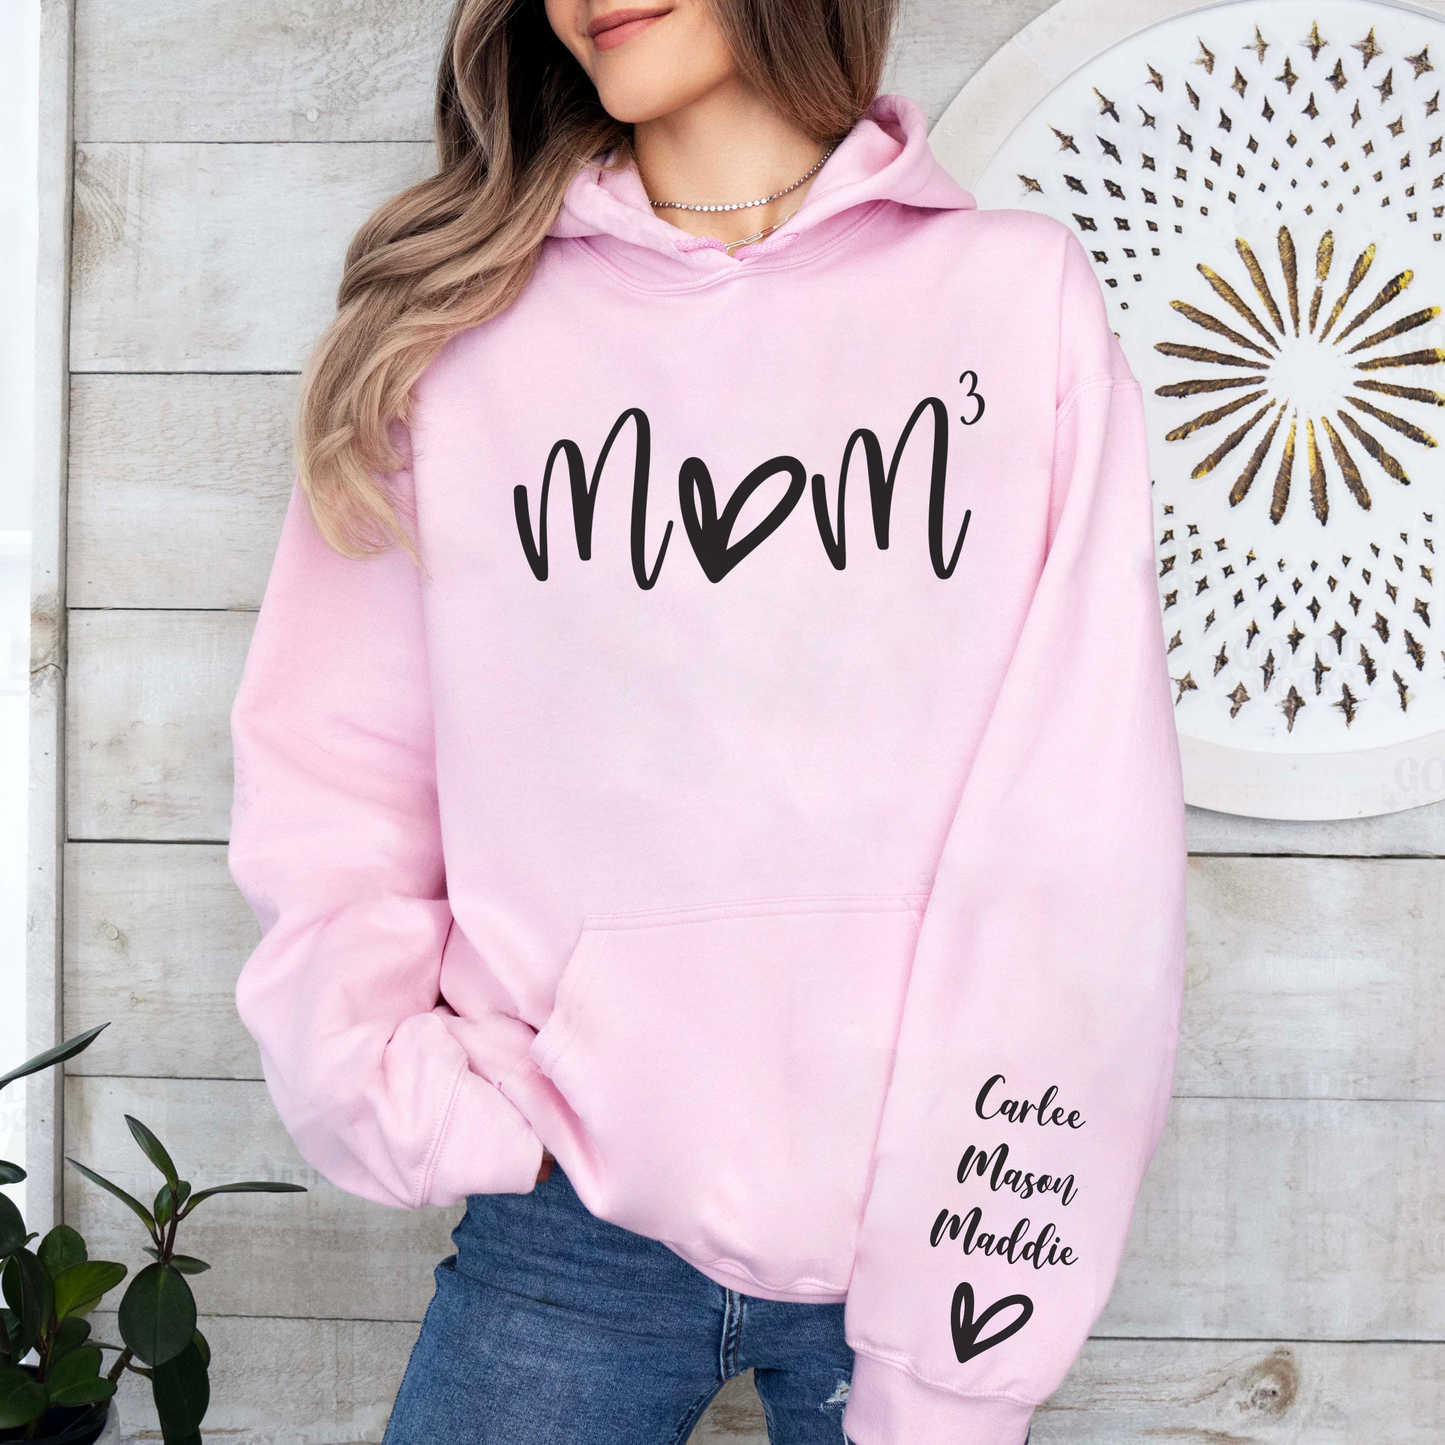 "Mom^N" Customizable Shirt: Personalize with Number of Kids & Names - Ideal Mother's Day Present